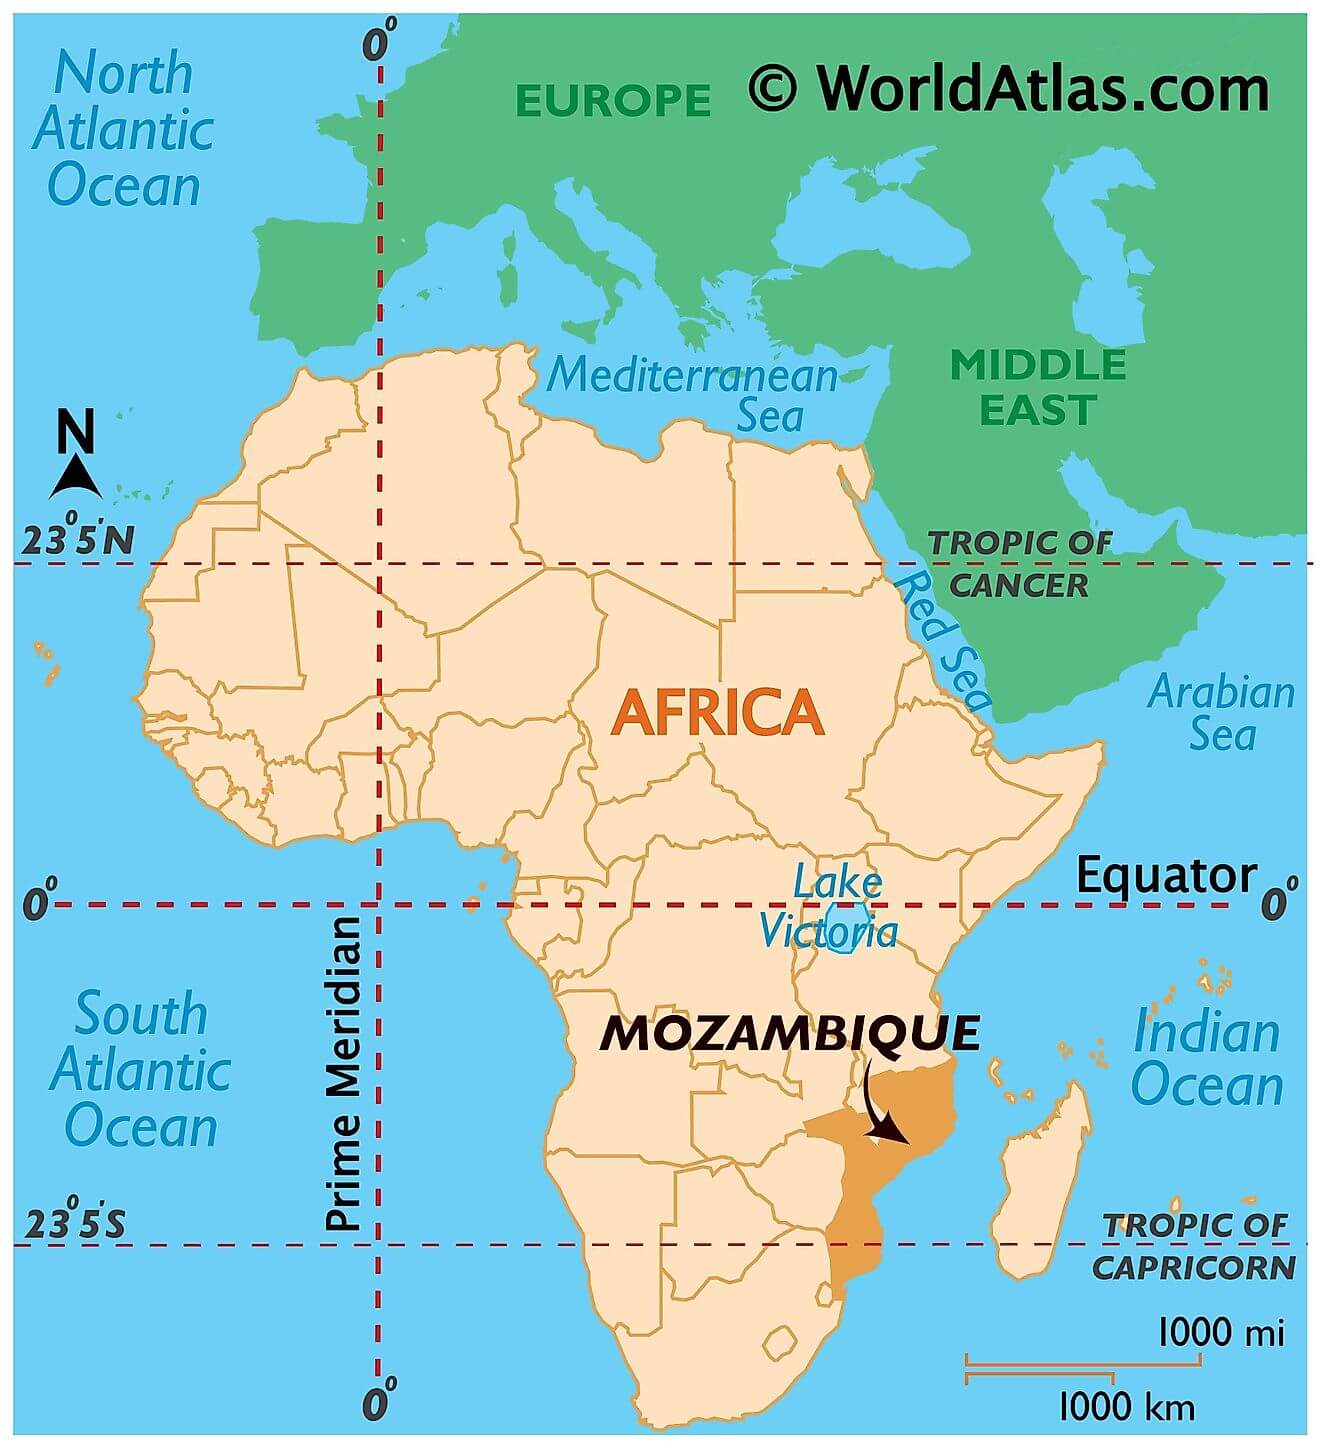 Where is Mozambique?